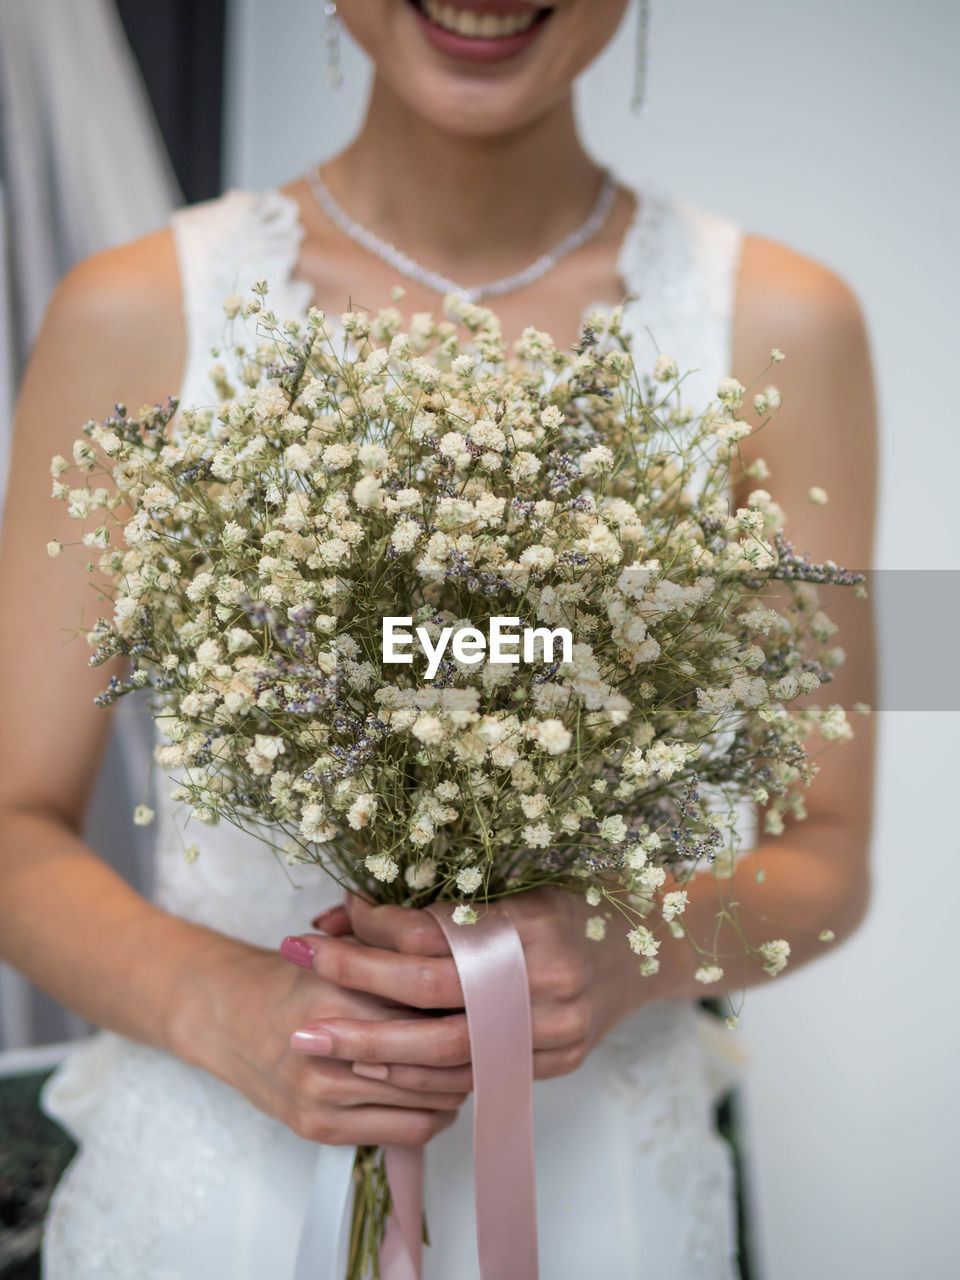 Midsection of bride holding flower bouquet during wedding ceremony